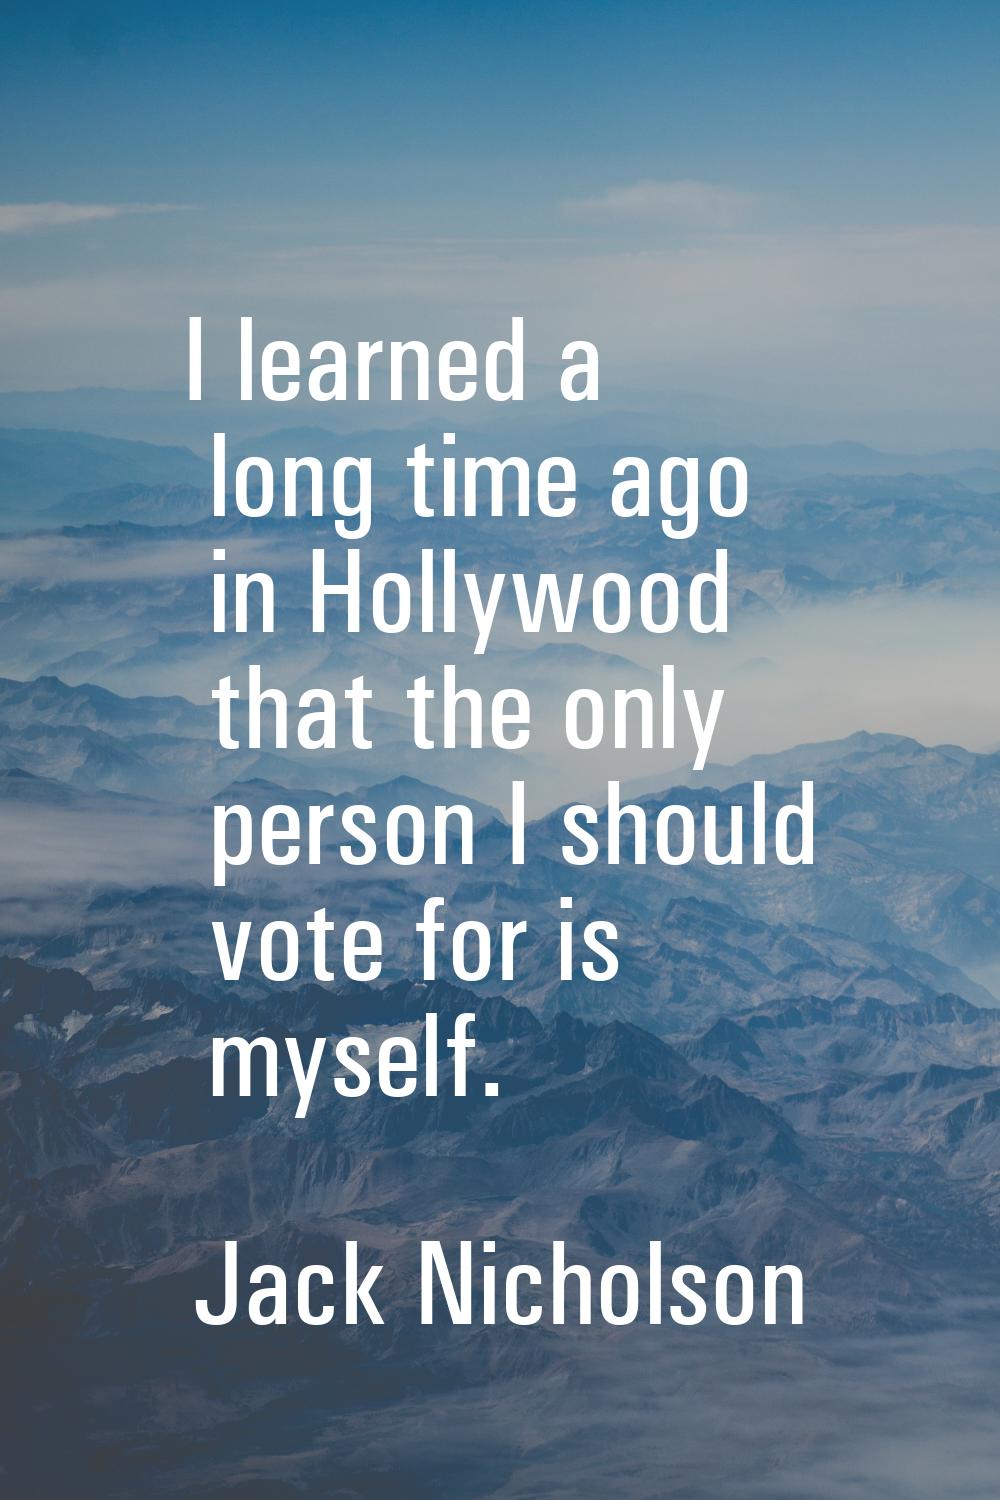 I learned a long time ago in Hollywood that the only person I should vote for is myself.